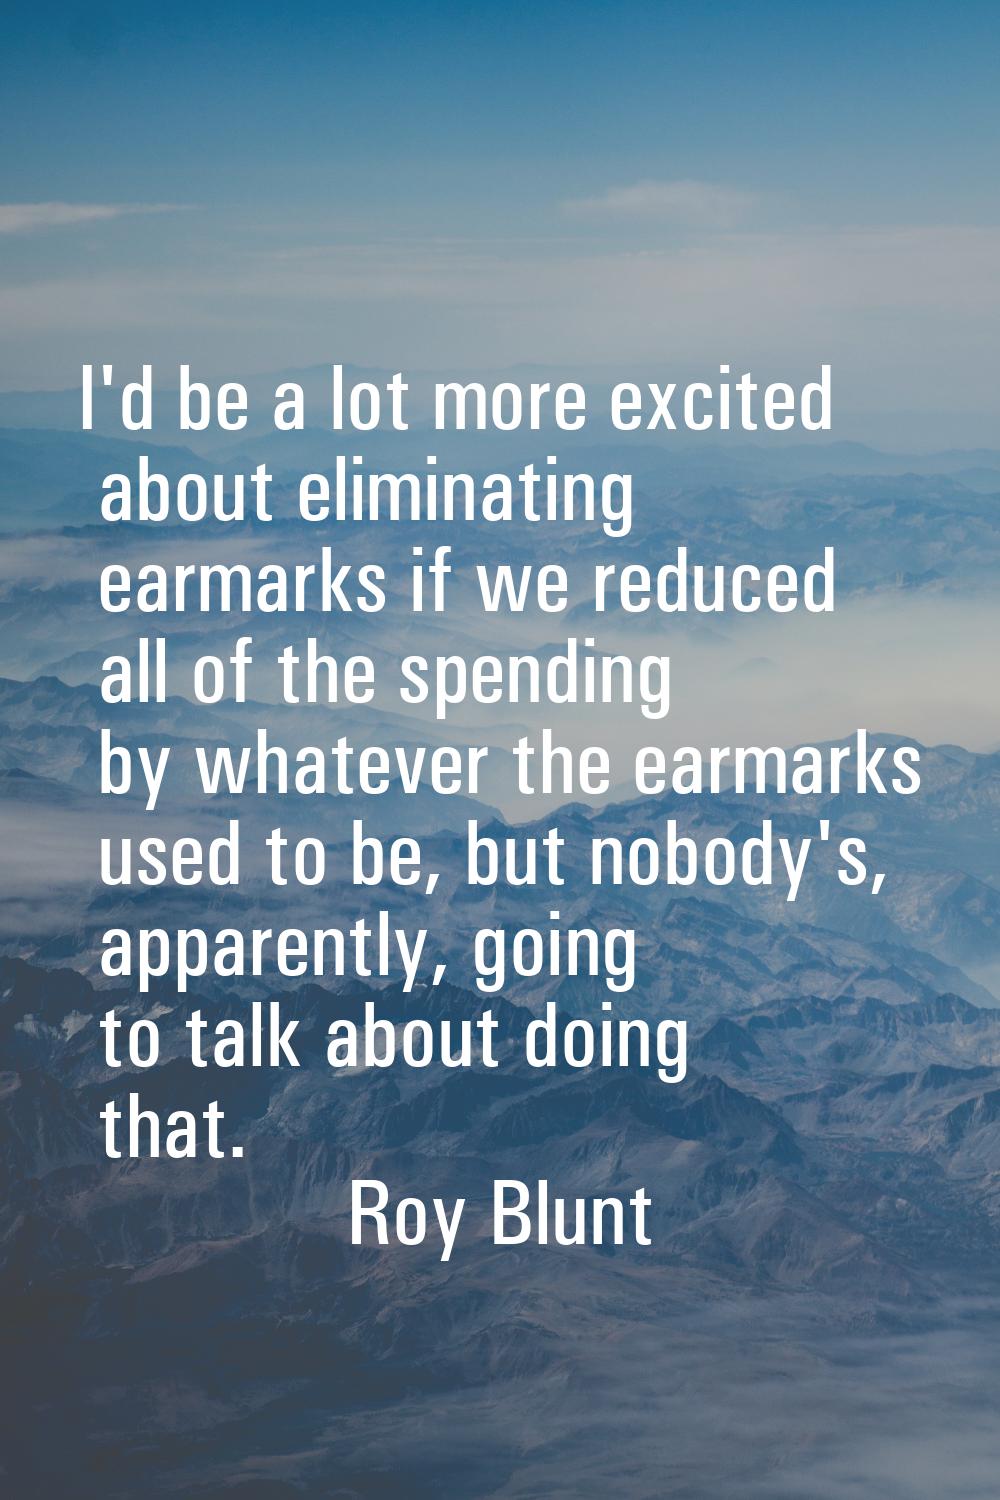 I'd be a lot more excited about eliminating earmarks if we reduced all of the spending by whatever 